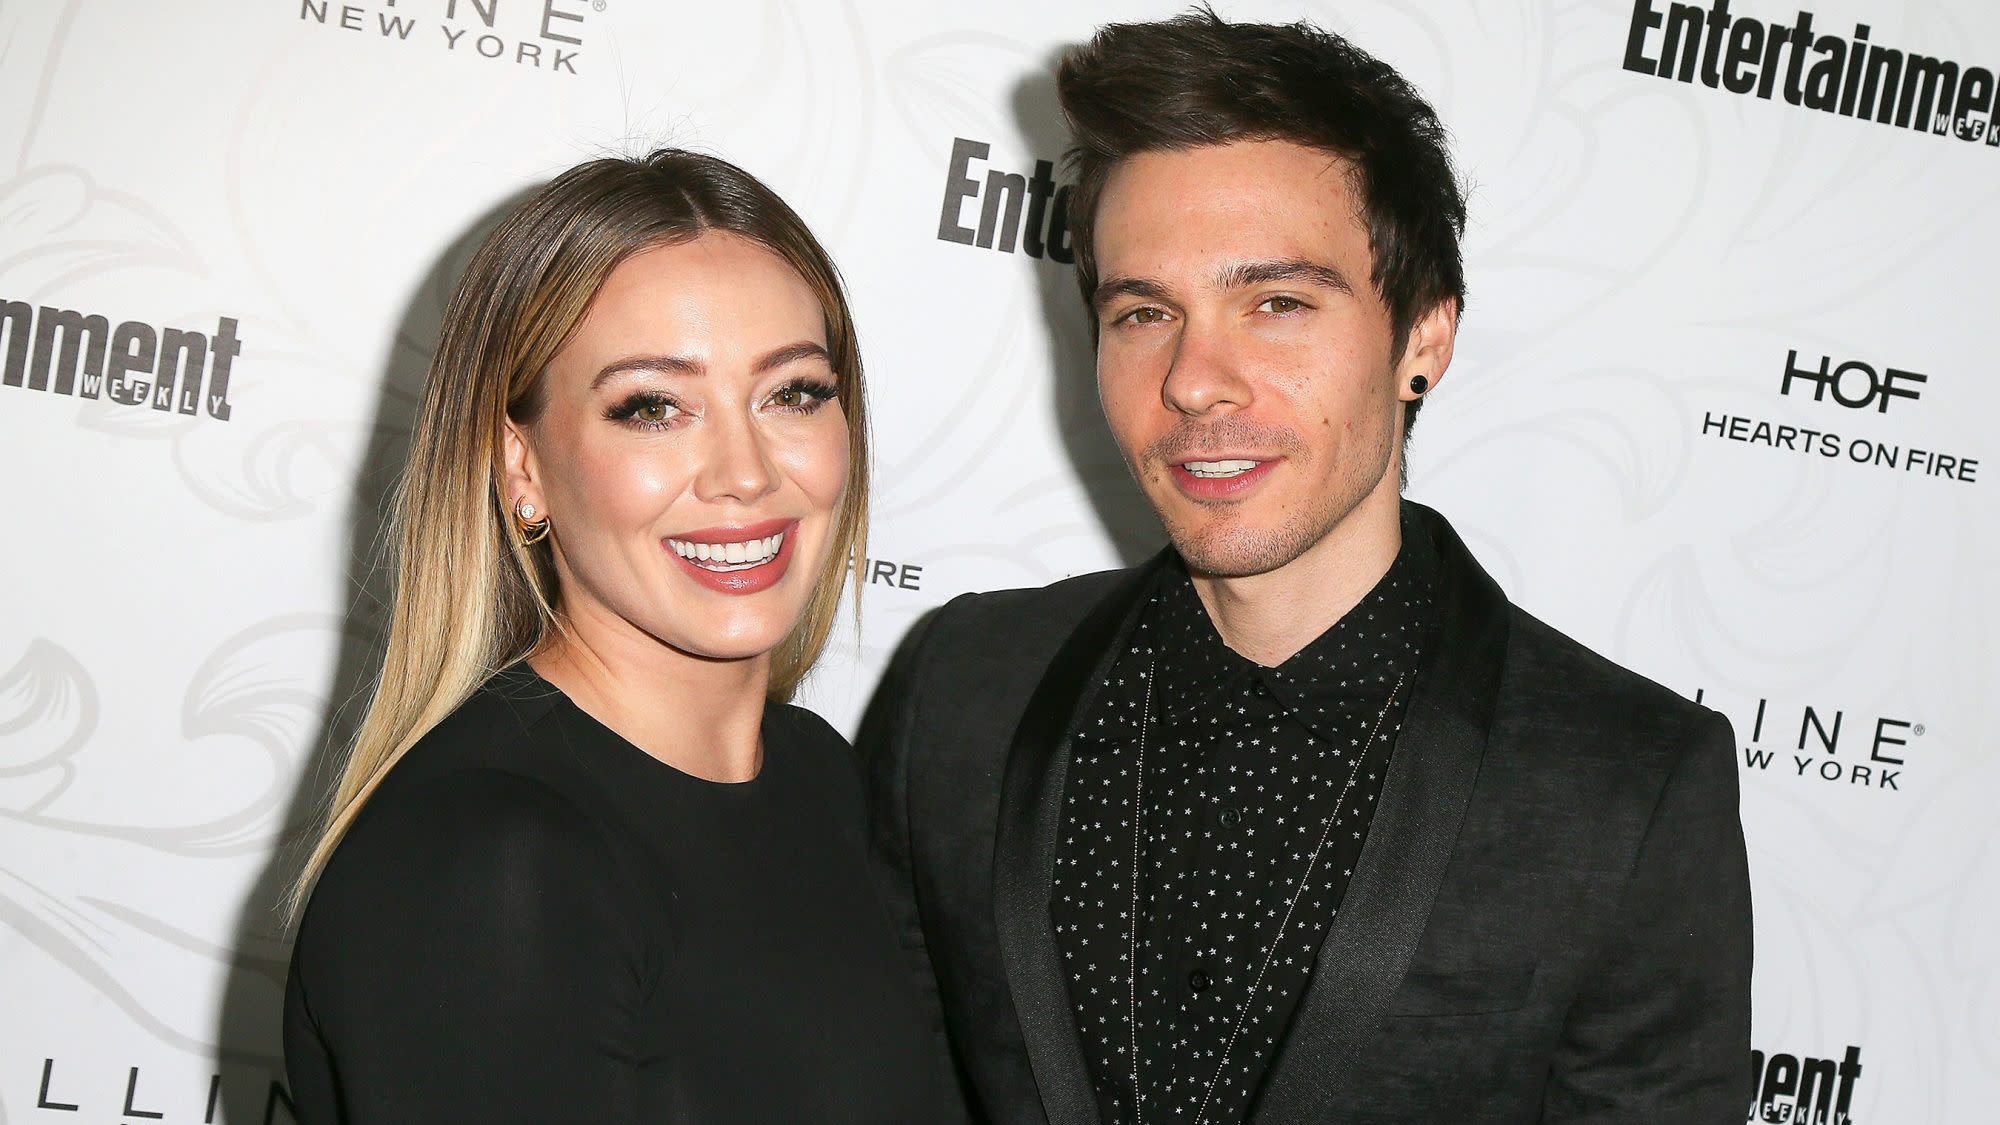 Hilary Duff and husband Matthew Koma welcome their second child